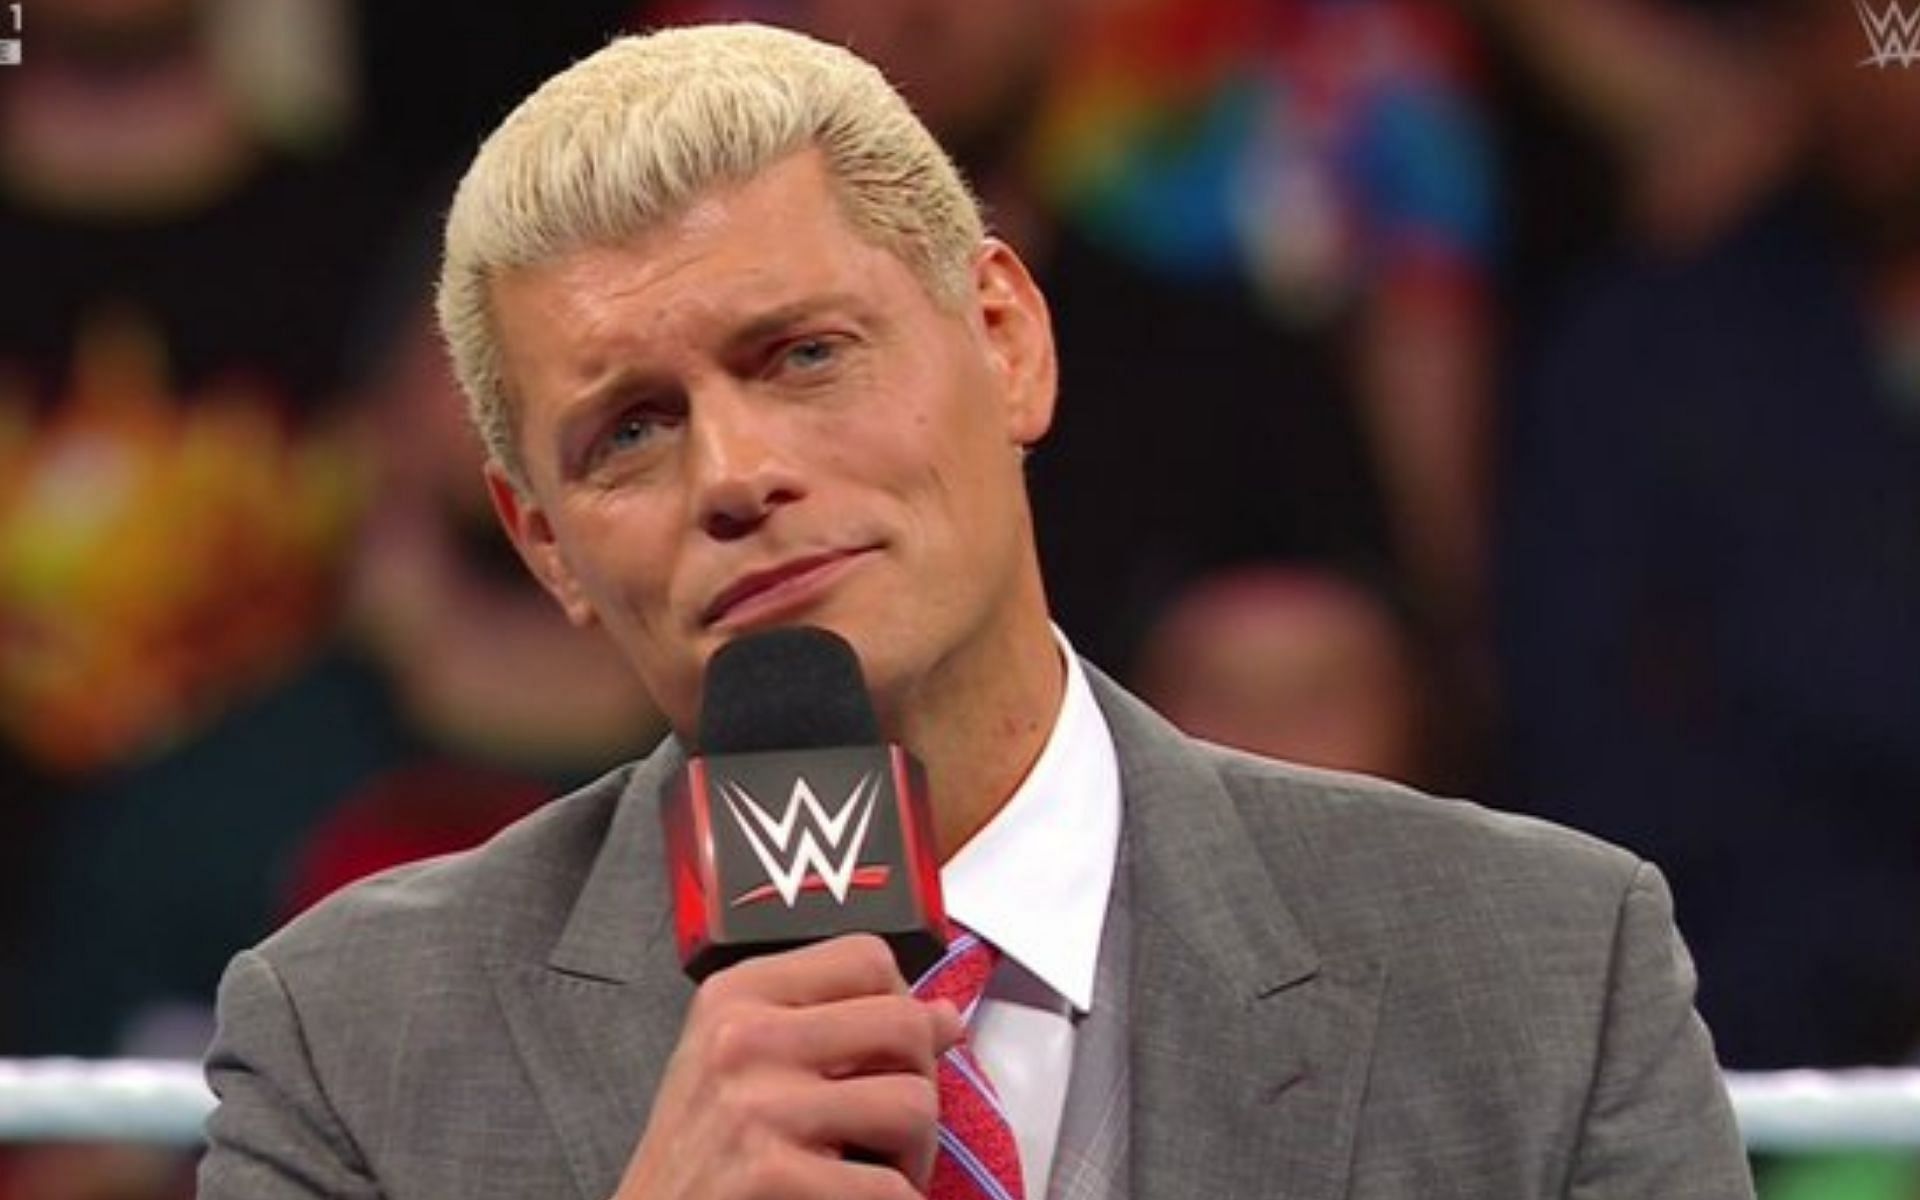 An emotional night for Cody, who was in the entire first hour of RAW